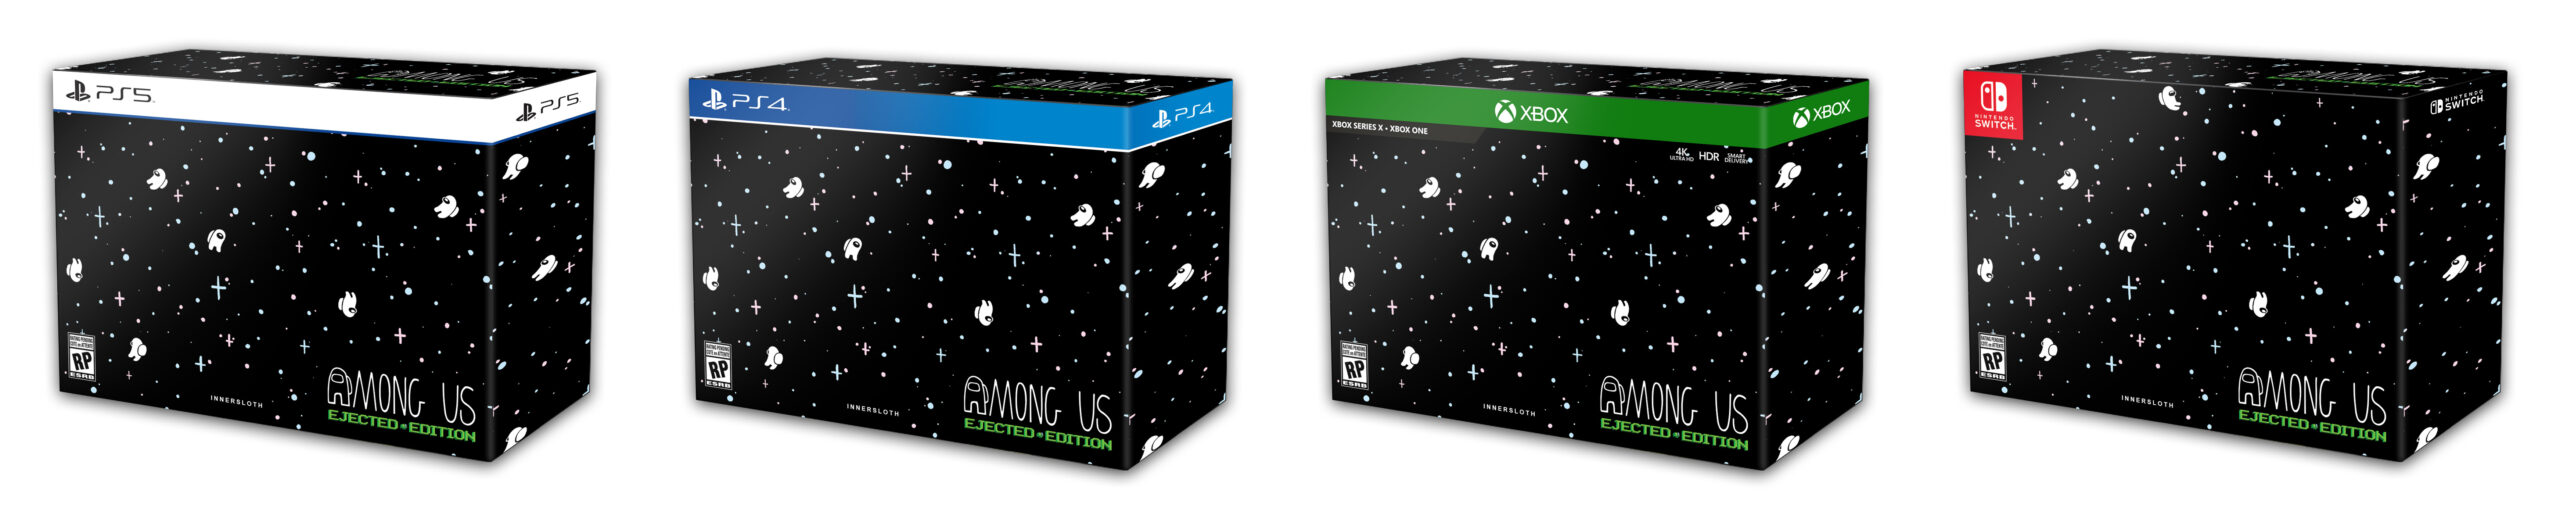 Among Us Collector's Edition annunciato per PS5, PS4, Xbox Series, Xbox One e Switch 5